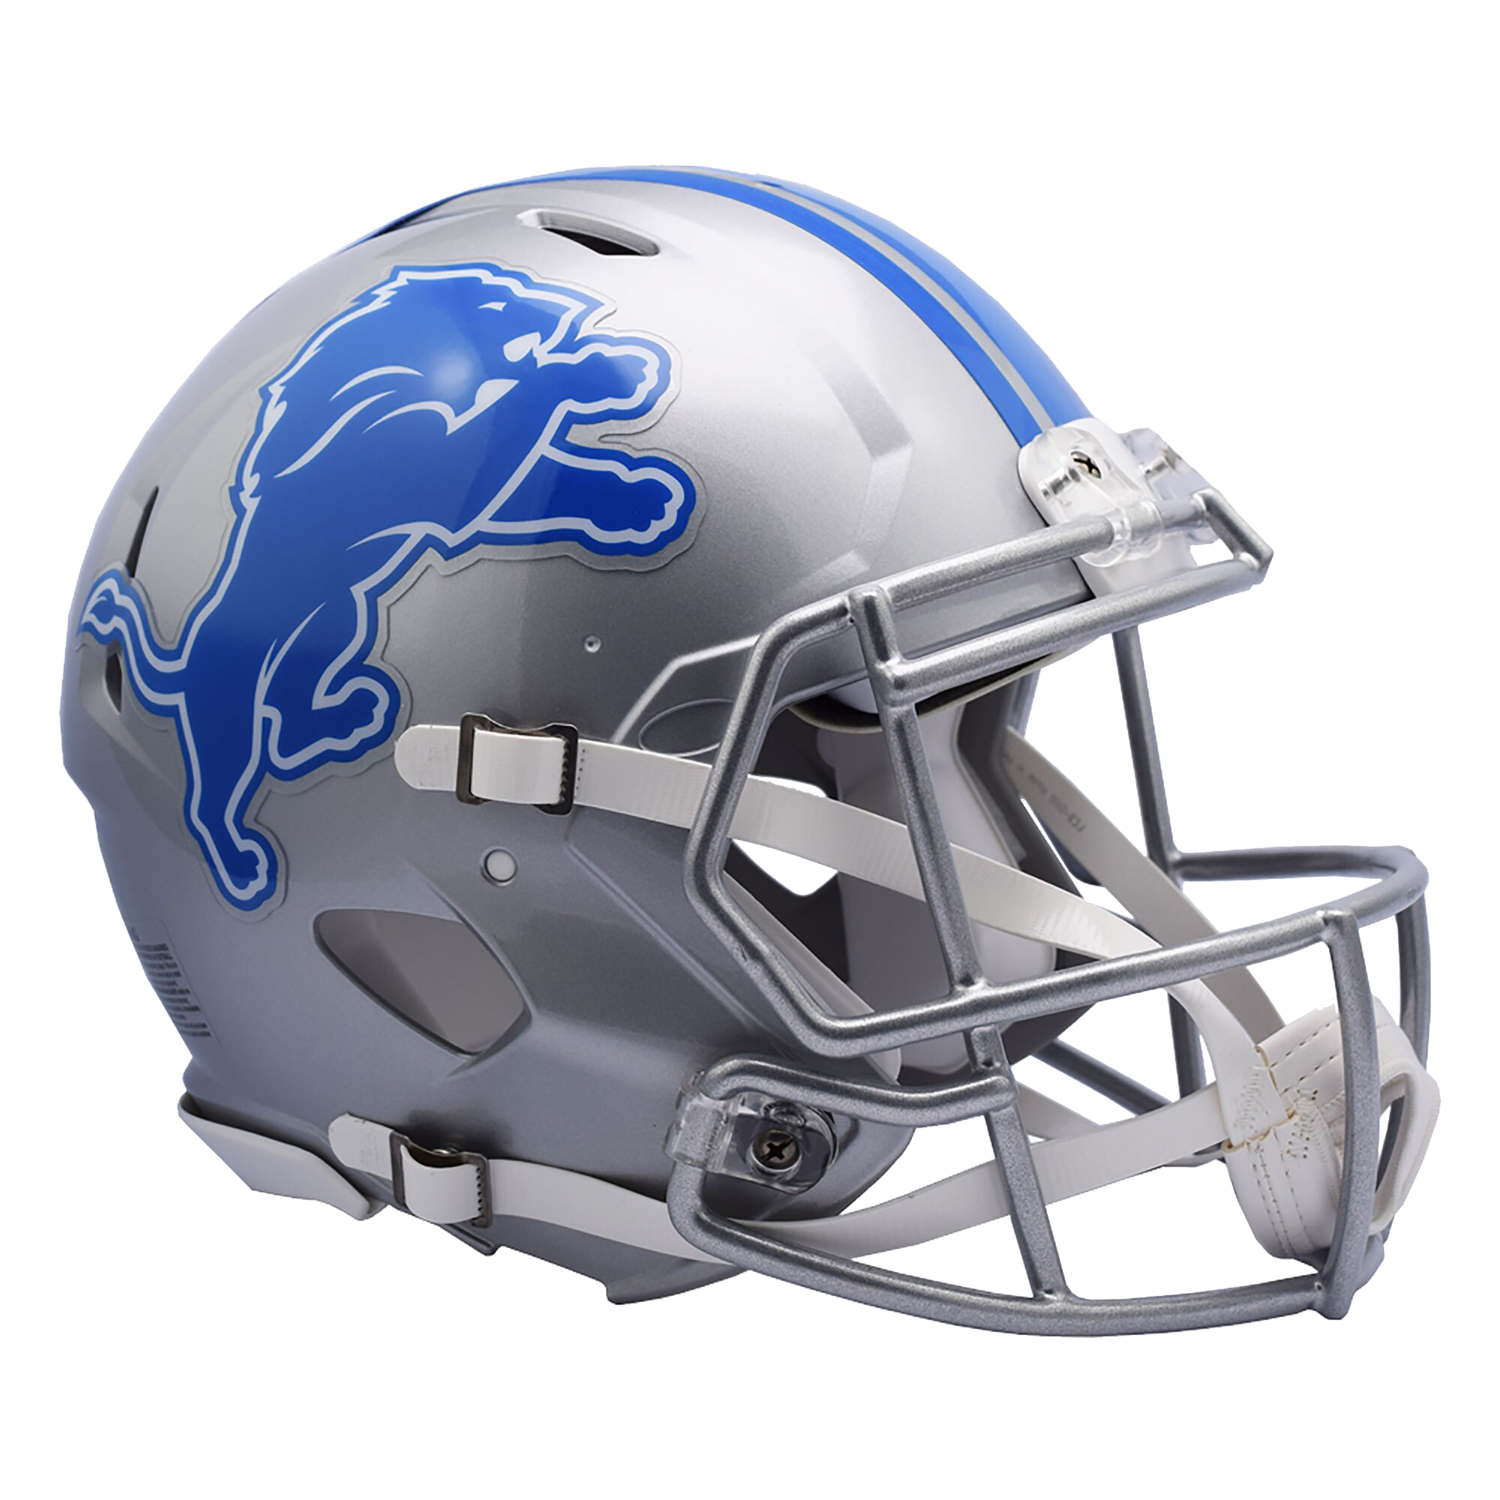 Ford Field to have new video boards for Detroit Lions' 2017 season